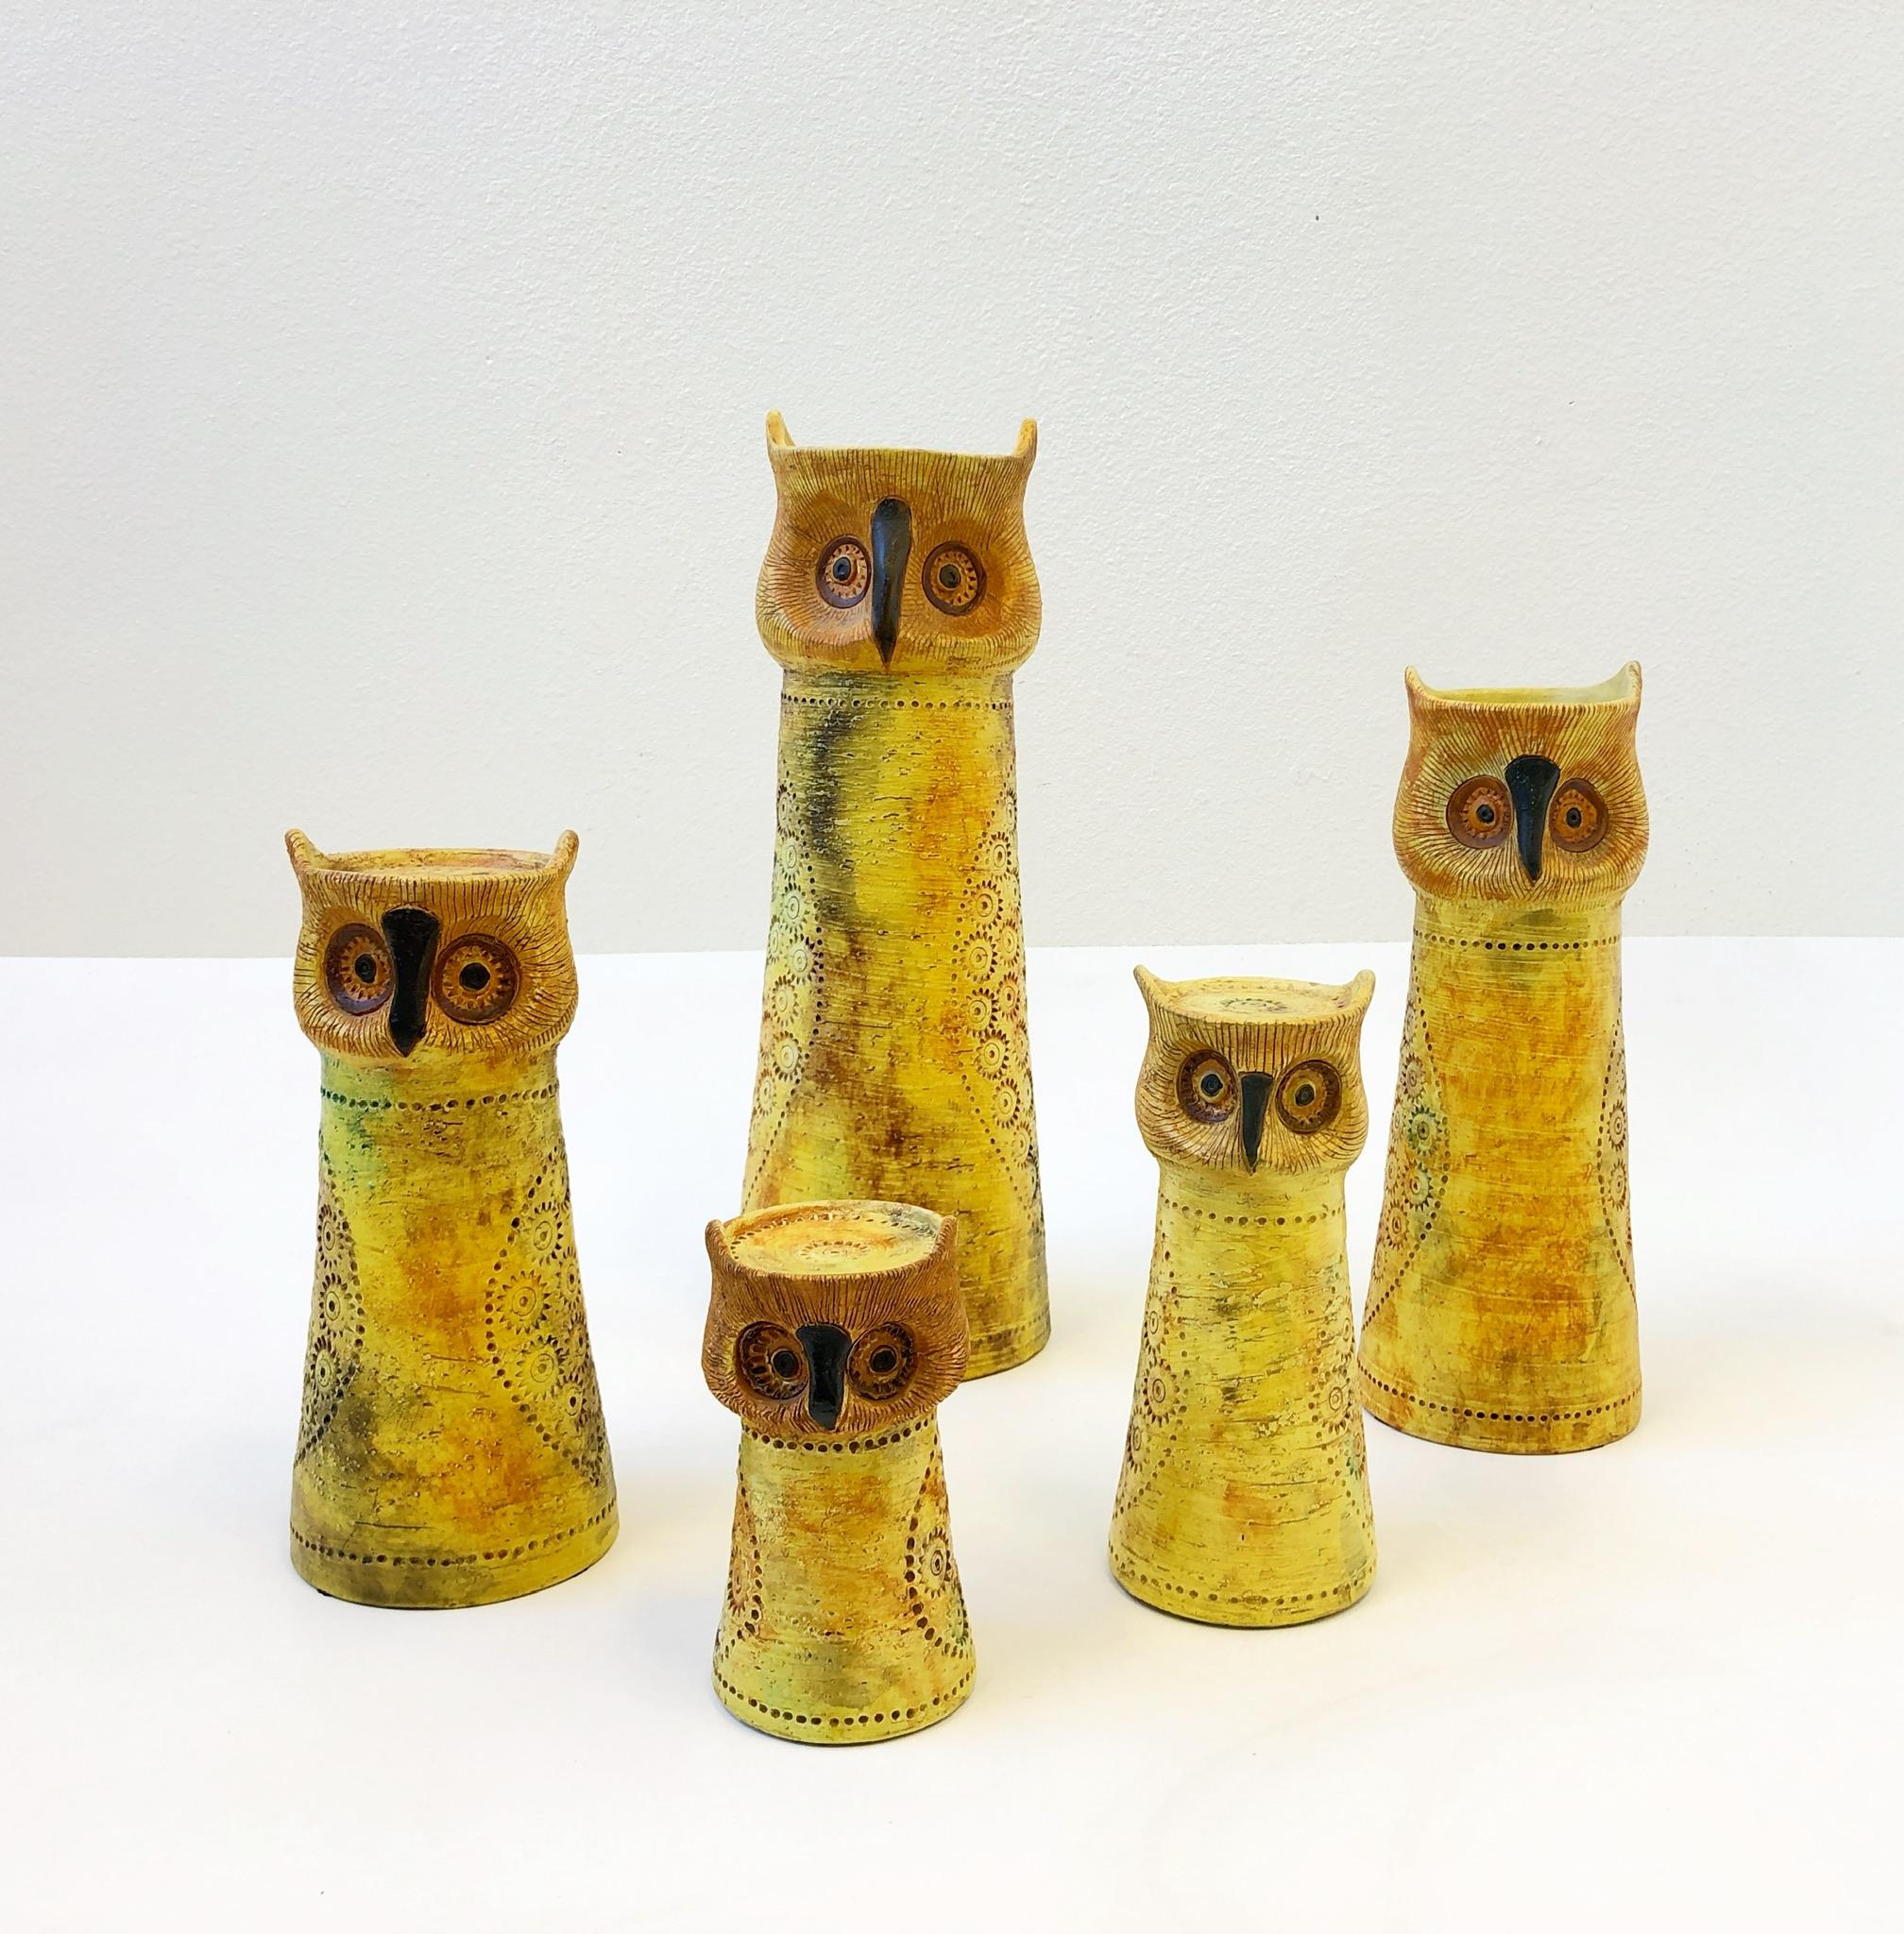 A rare set of five Italian ceramic owls by Aldo Londi for Bitossi imported by Rosenthal & Netter. Four of the owls are candleholder and one is a vase. All of the owls are marked made in Italy and have the Rosenthal & Netter label. The tallest owl is